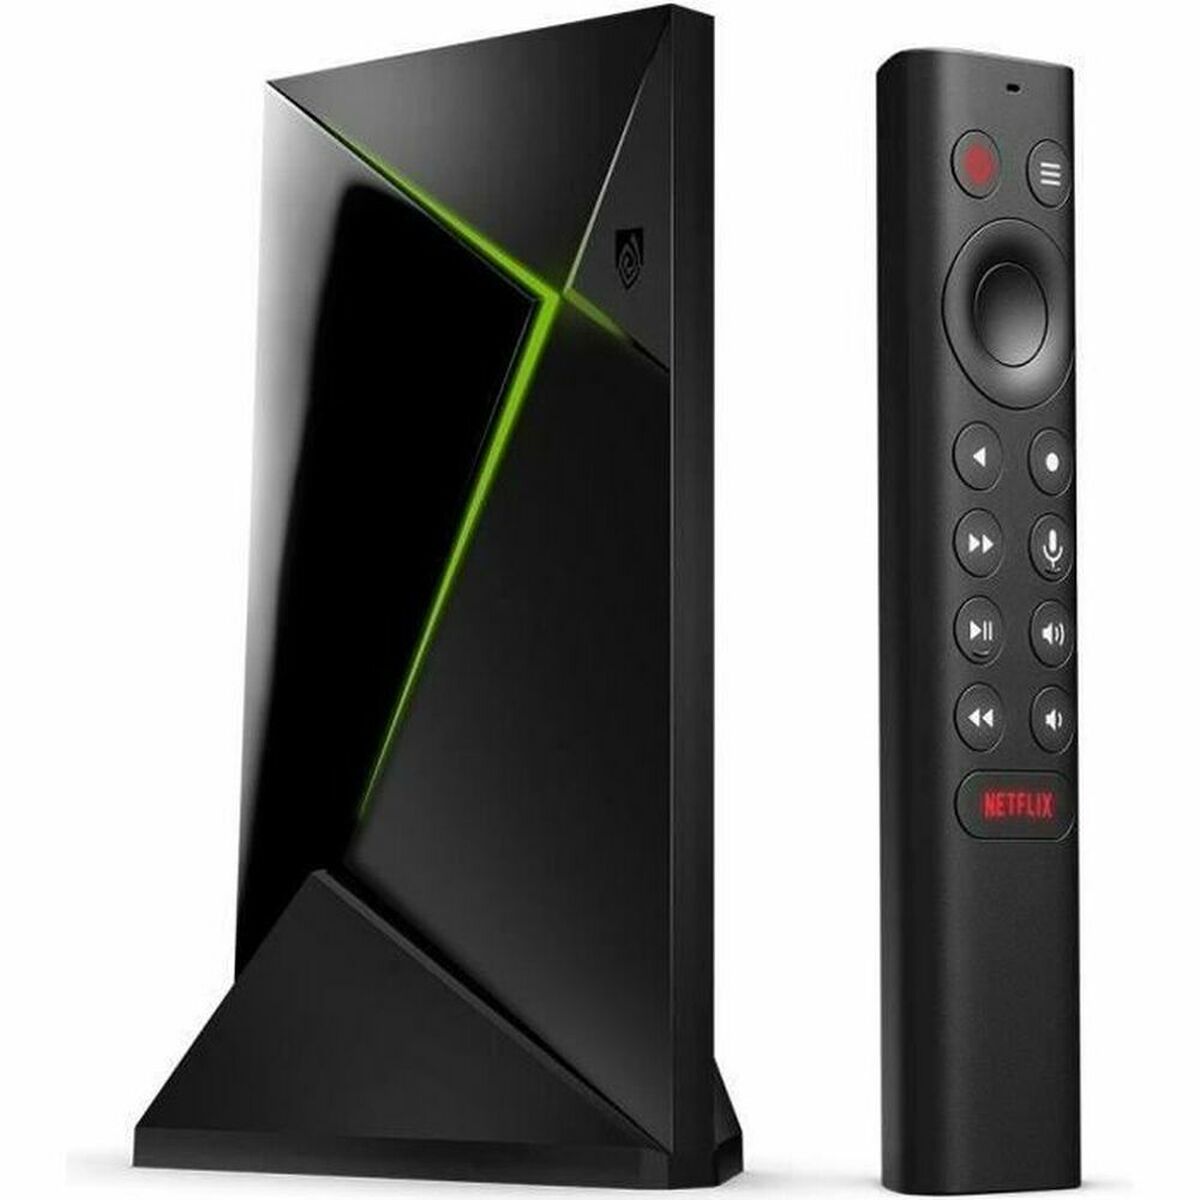 Streaming content Nvidia Shield TV Pro, Nvidia, Electronics, Audio and Hi-Fi equipment, streaming-content-nvidia-shield-tv-pro, :Ultra HD, Brand_Nvidia, category-reference-2609, category-reference-2883, category-reference-2931, category-reference-t-19653, category-reference-t-7441, category-reference-t-7452, cinema and television, Condition_NEW, Price_200 - 300, Teleworking, RiotNook